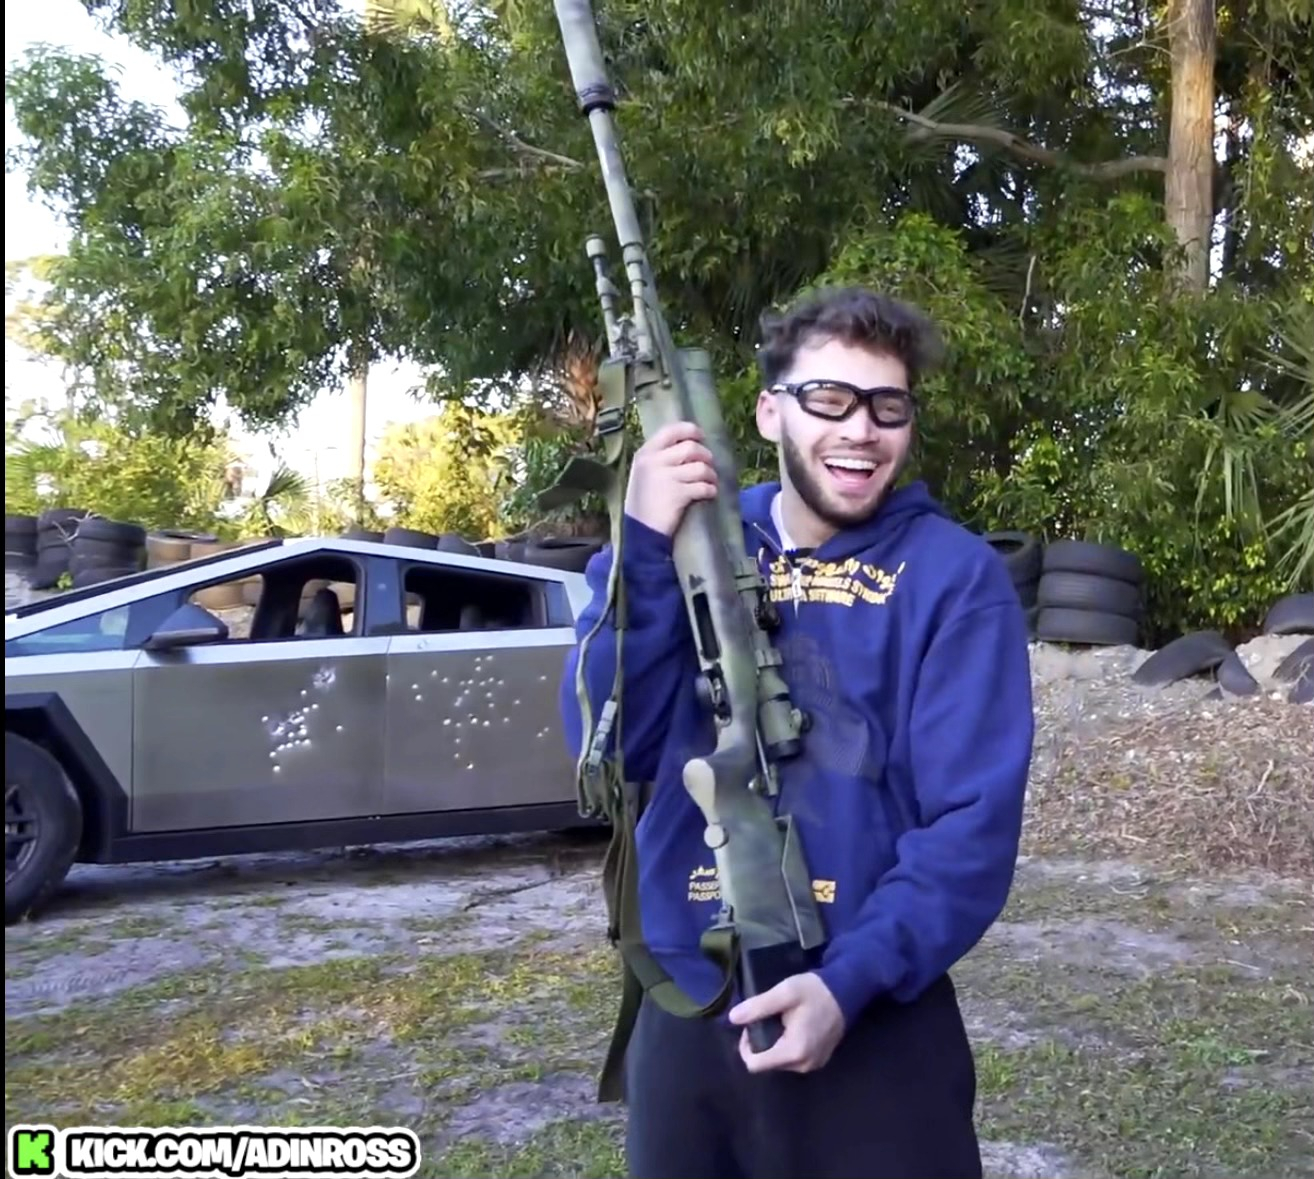 Person holding a large toy gun with a smile, standing outdoors near a car and tires